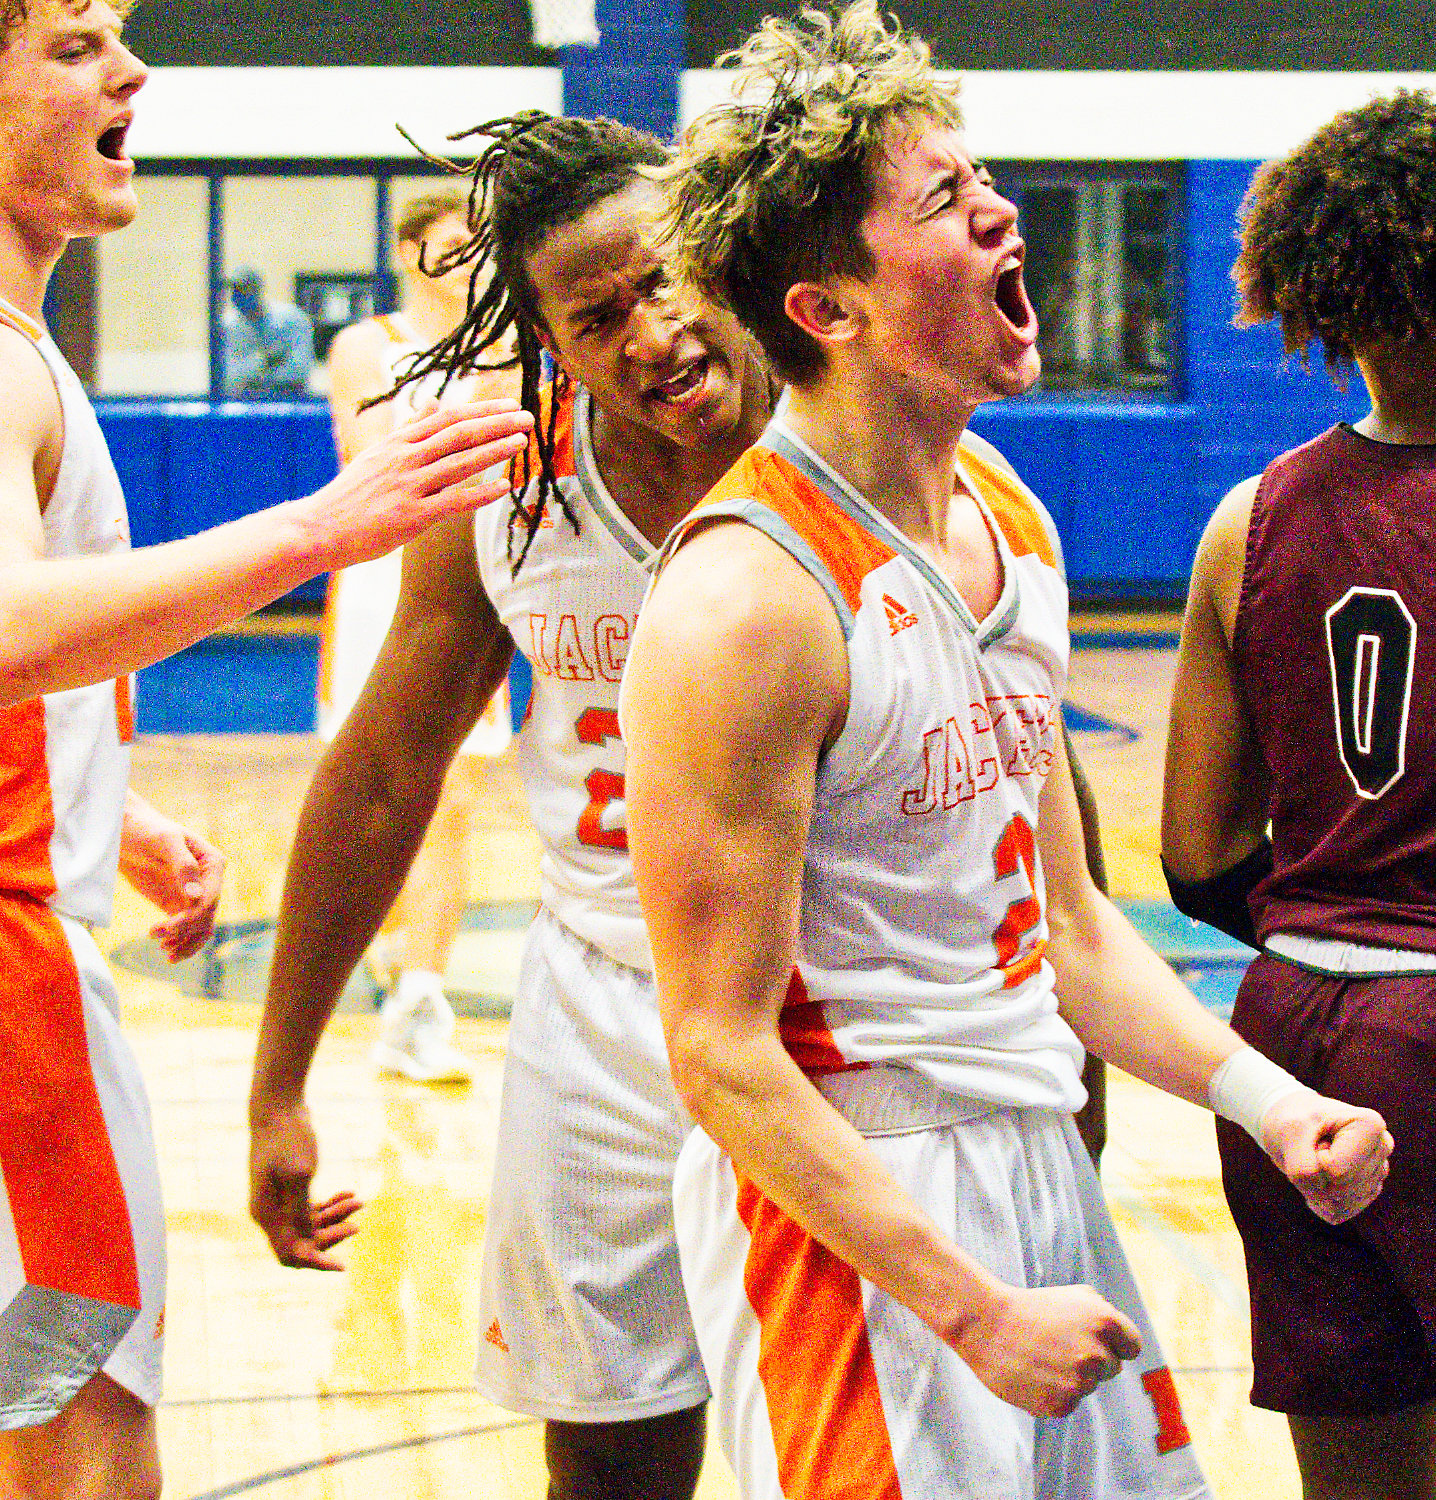 From left, Dawson Pendergrass, Trevion Sneed and T.J. Moreland react enthusiastically to Moreland scoring two points to put Mineola ahead by 12 in the fourth quarter while drawing a foul on Jefferson.  [see more shots, score prints]